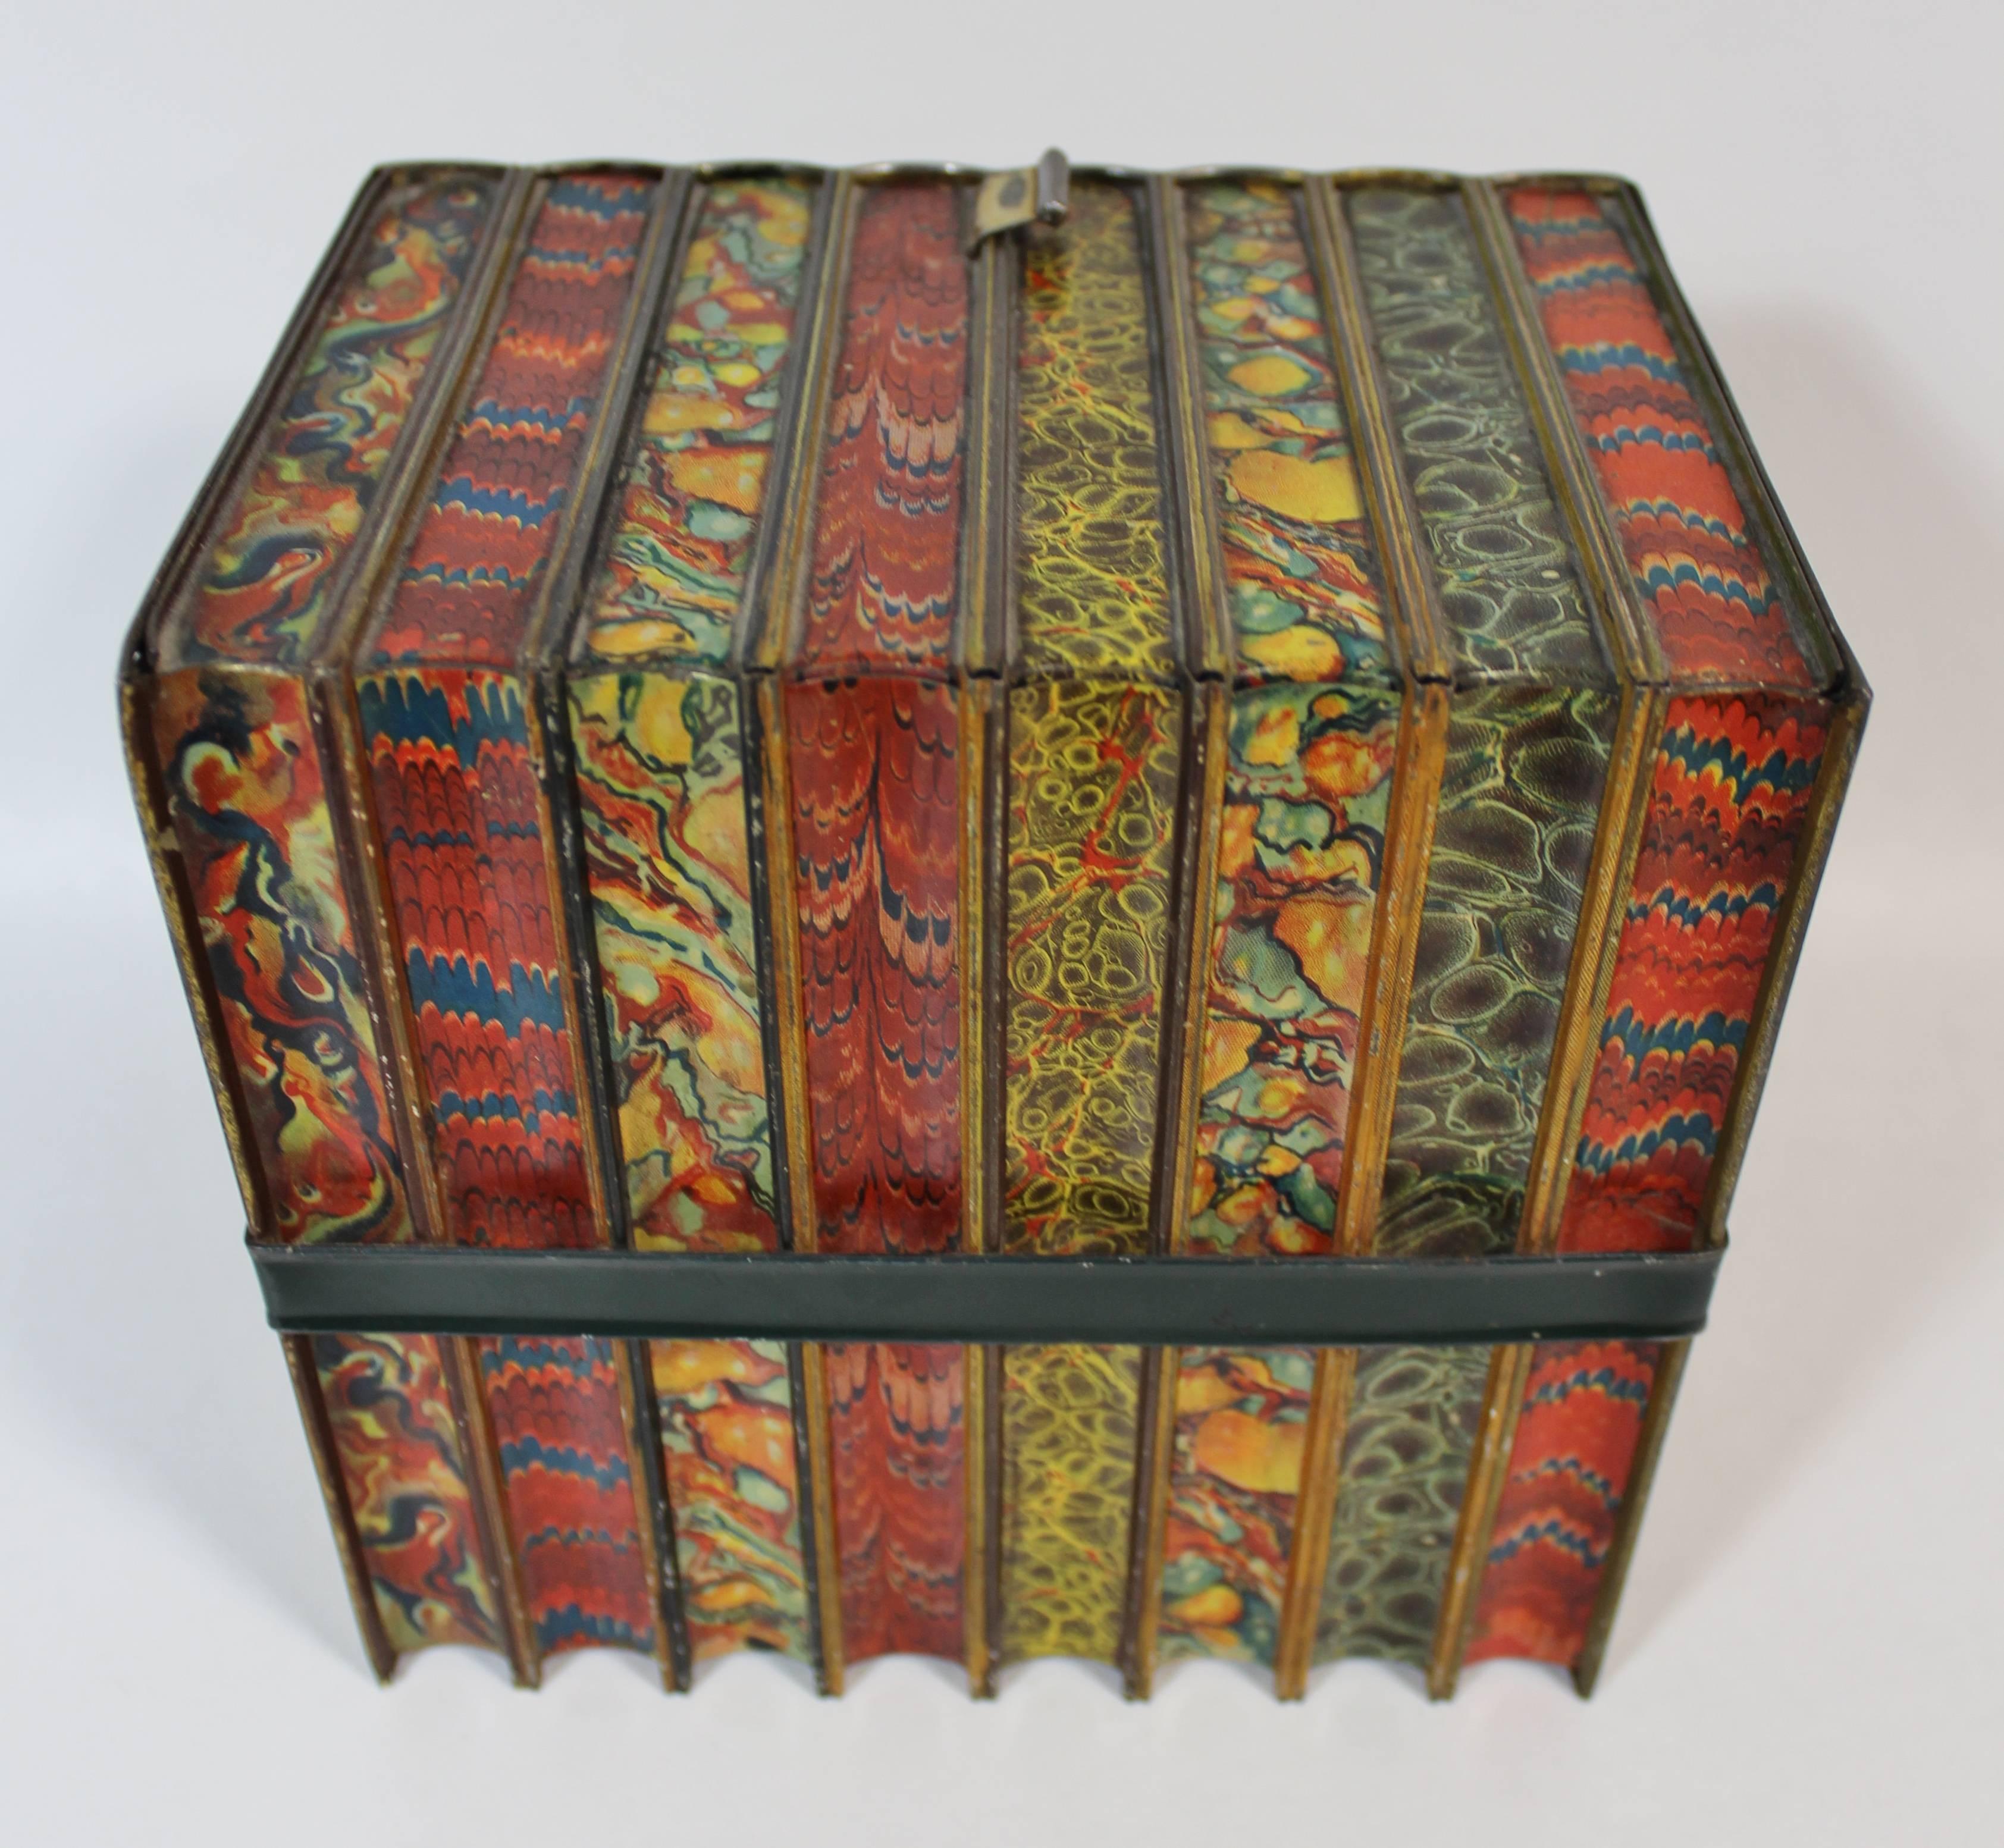 A Huntley & Palmers biscuit tin of the 'Literature' pattern, simulating a bundle of leather bound books with marbleized page ends. They're held together by a tin leather strap and a pull tab to open the tin box resembles a bookmark.